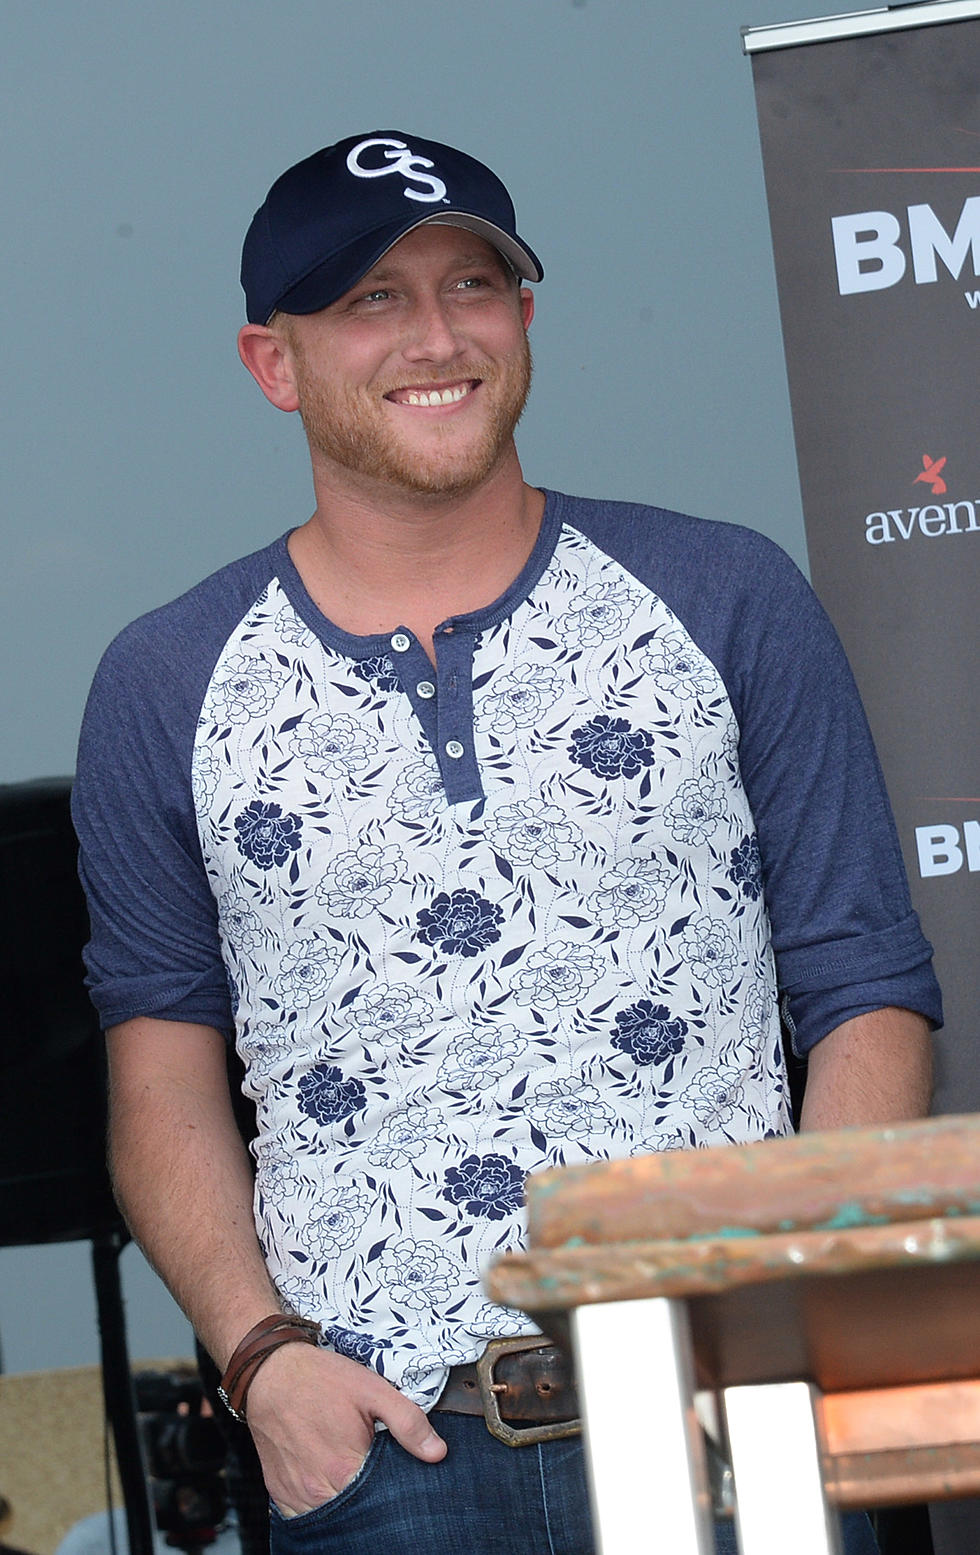 Acoustic Listen to Cole Swindell’s ‘Hope You Get Lonely Tonight’ [VIDEO]